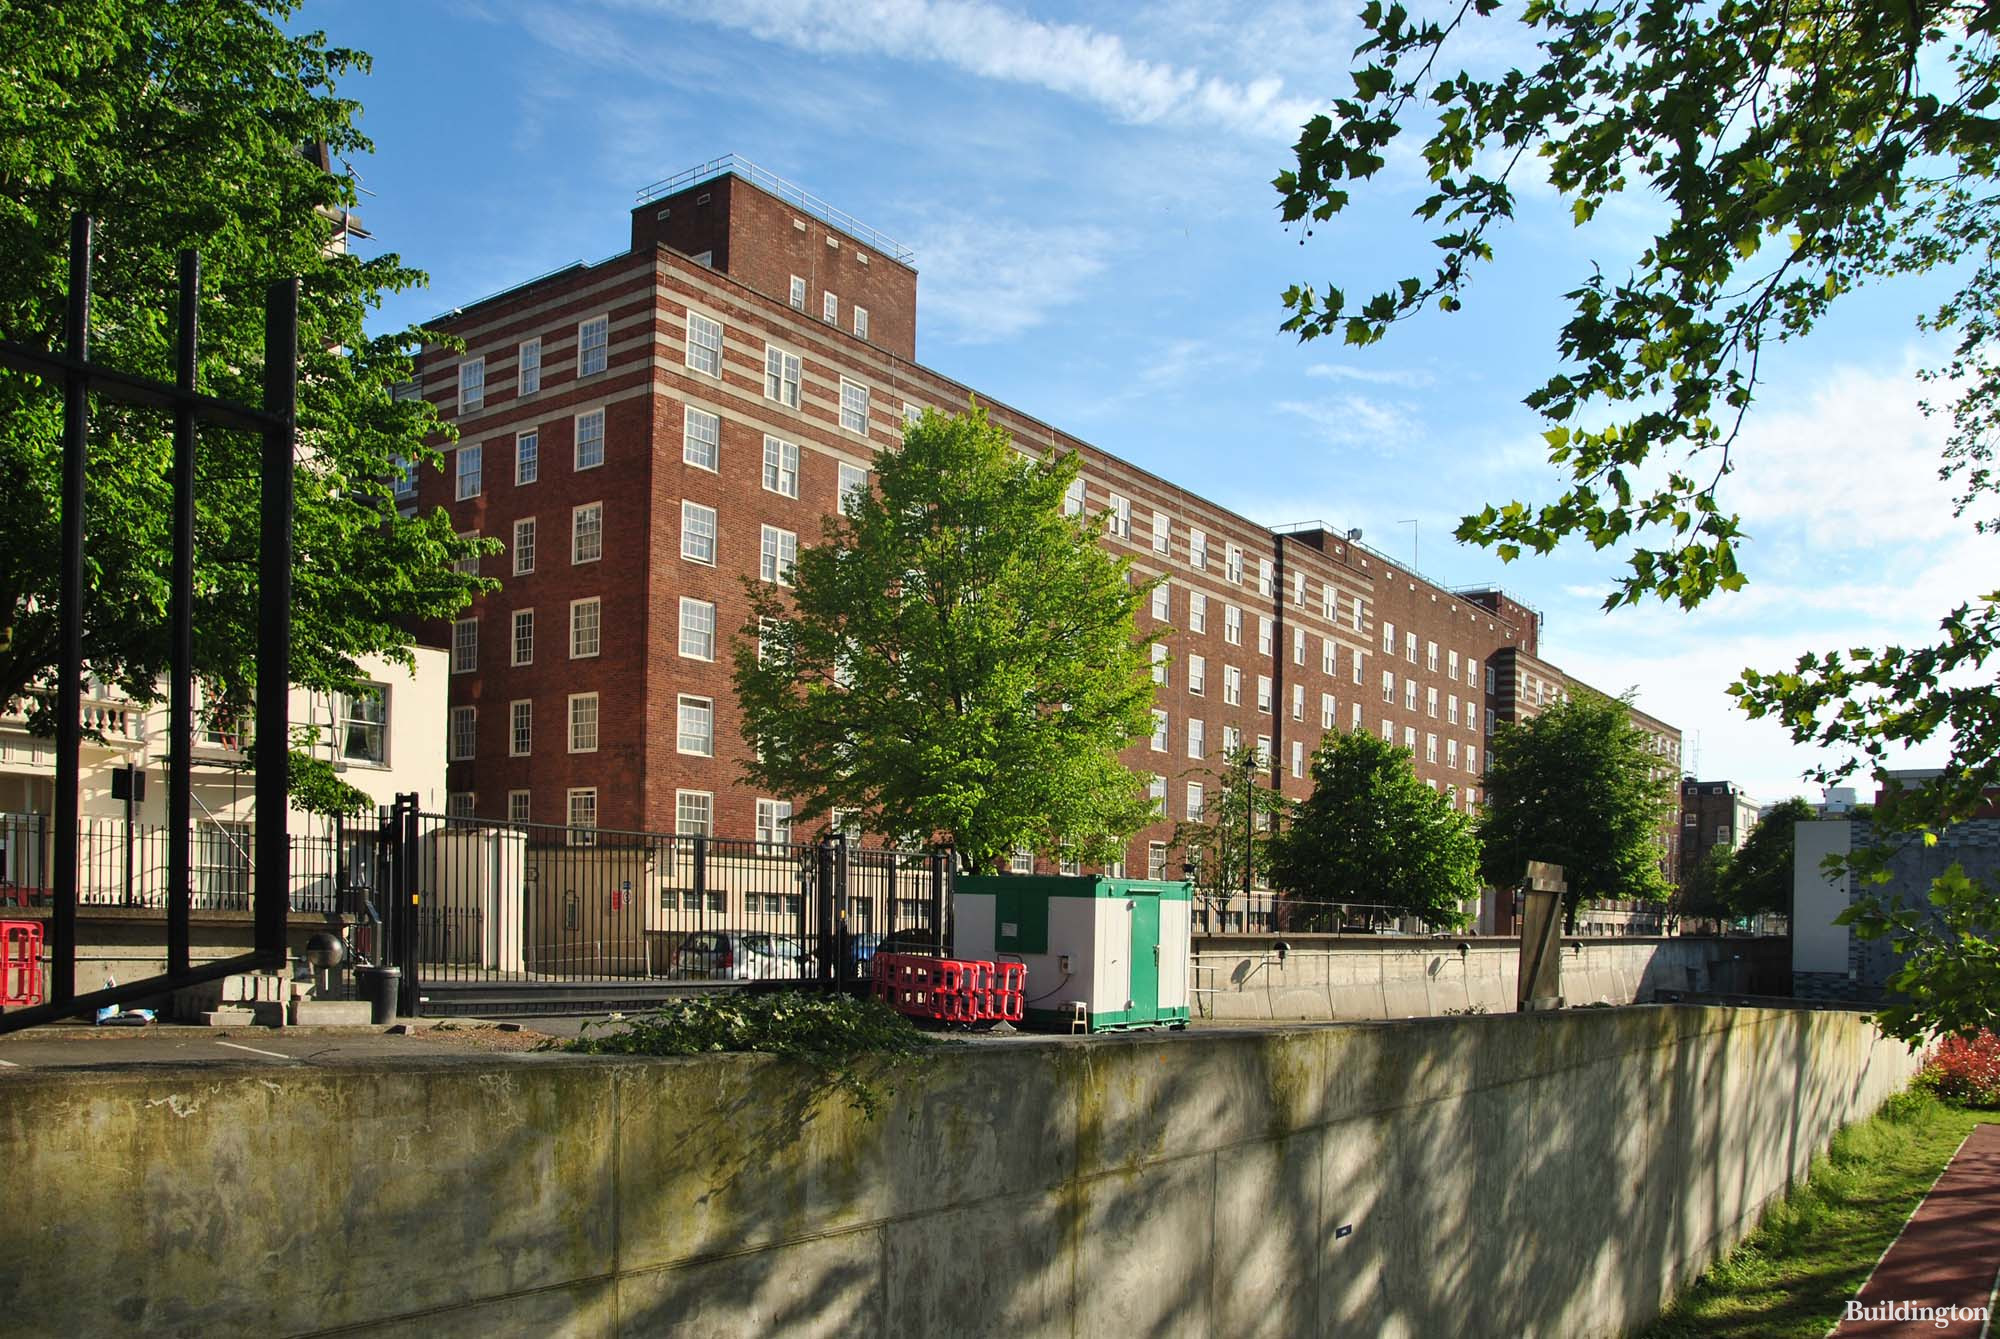 View to Dolphin Square from Lupus Street in Pimlico, London SW1.